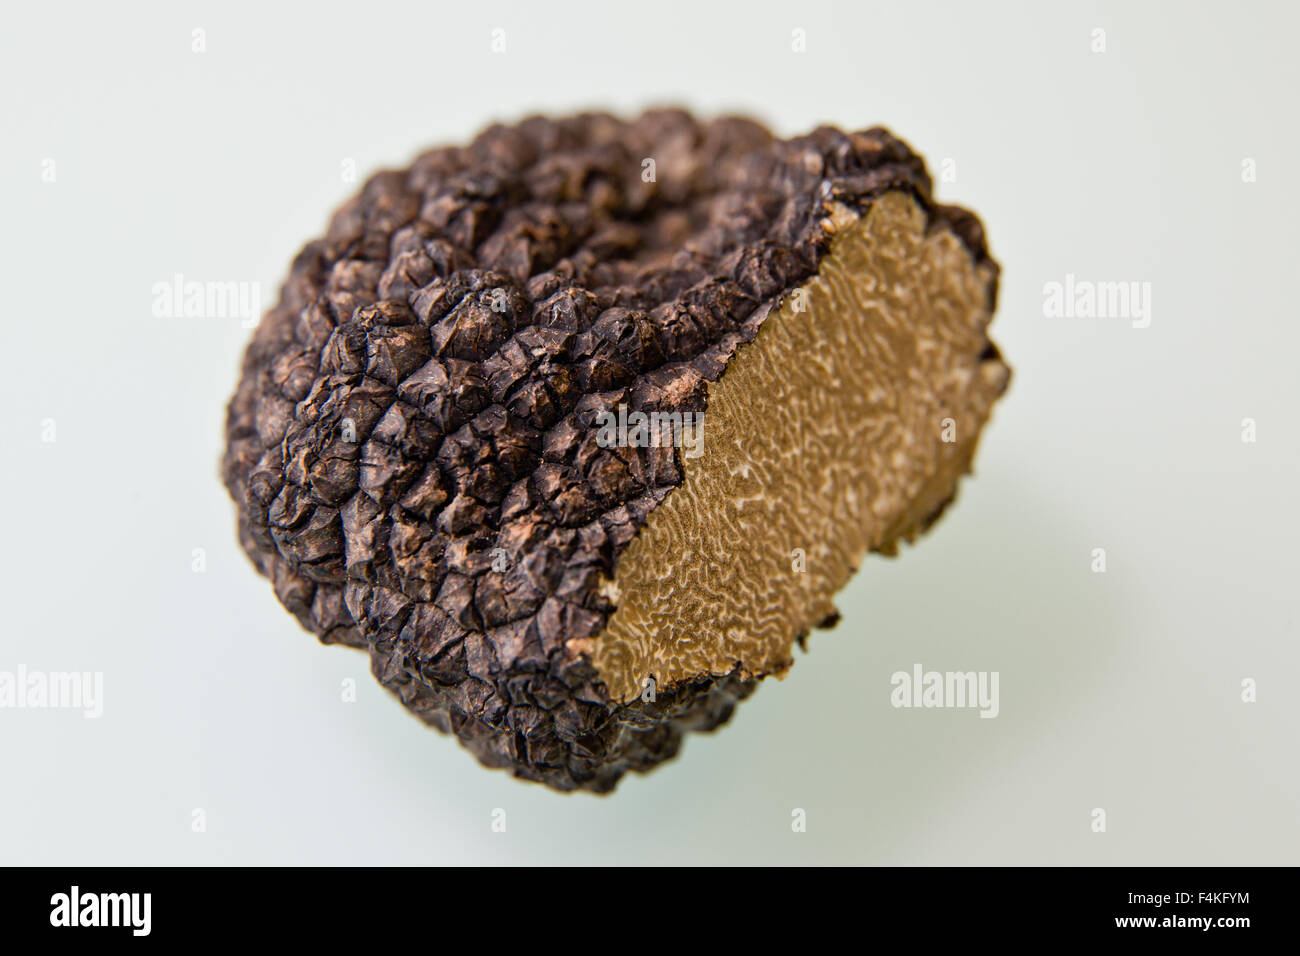 Veitshoechheim, Germany. 14th Oct, 2015. A burgundy truffle lies on a table at the Bavarian state institute for viniculture and horticulture (Bayerische Landesanstalt fuer Weinbau und Gartenbau) (LWG) in Veitshoechheim, Germany, 14 October 2015. Experts at the LWG are studying how truffles can be reliably cultivated. In order to do this, test plants, usually hazelnut, are inoculated with truffle spores. PHOTO: DANIEL KARMANN/DPA/Alamy Live News Stock Photo